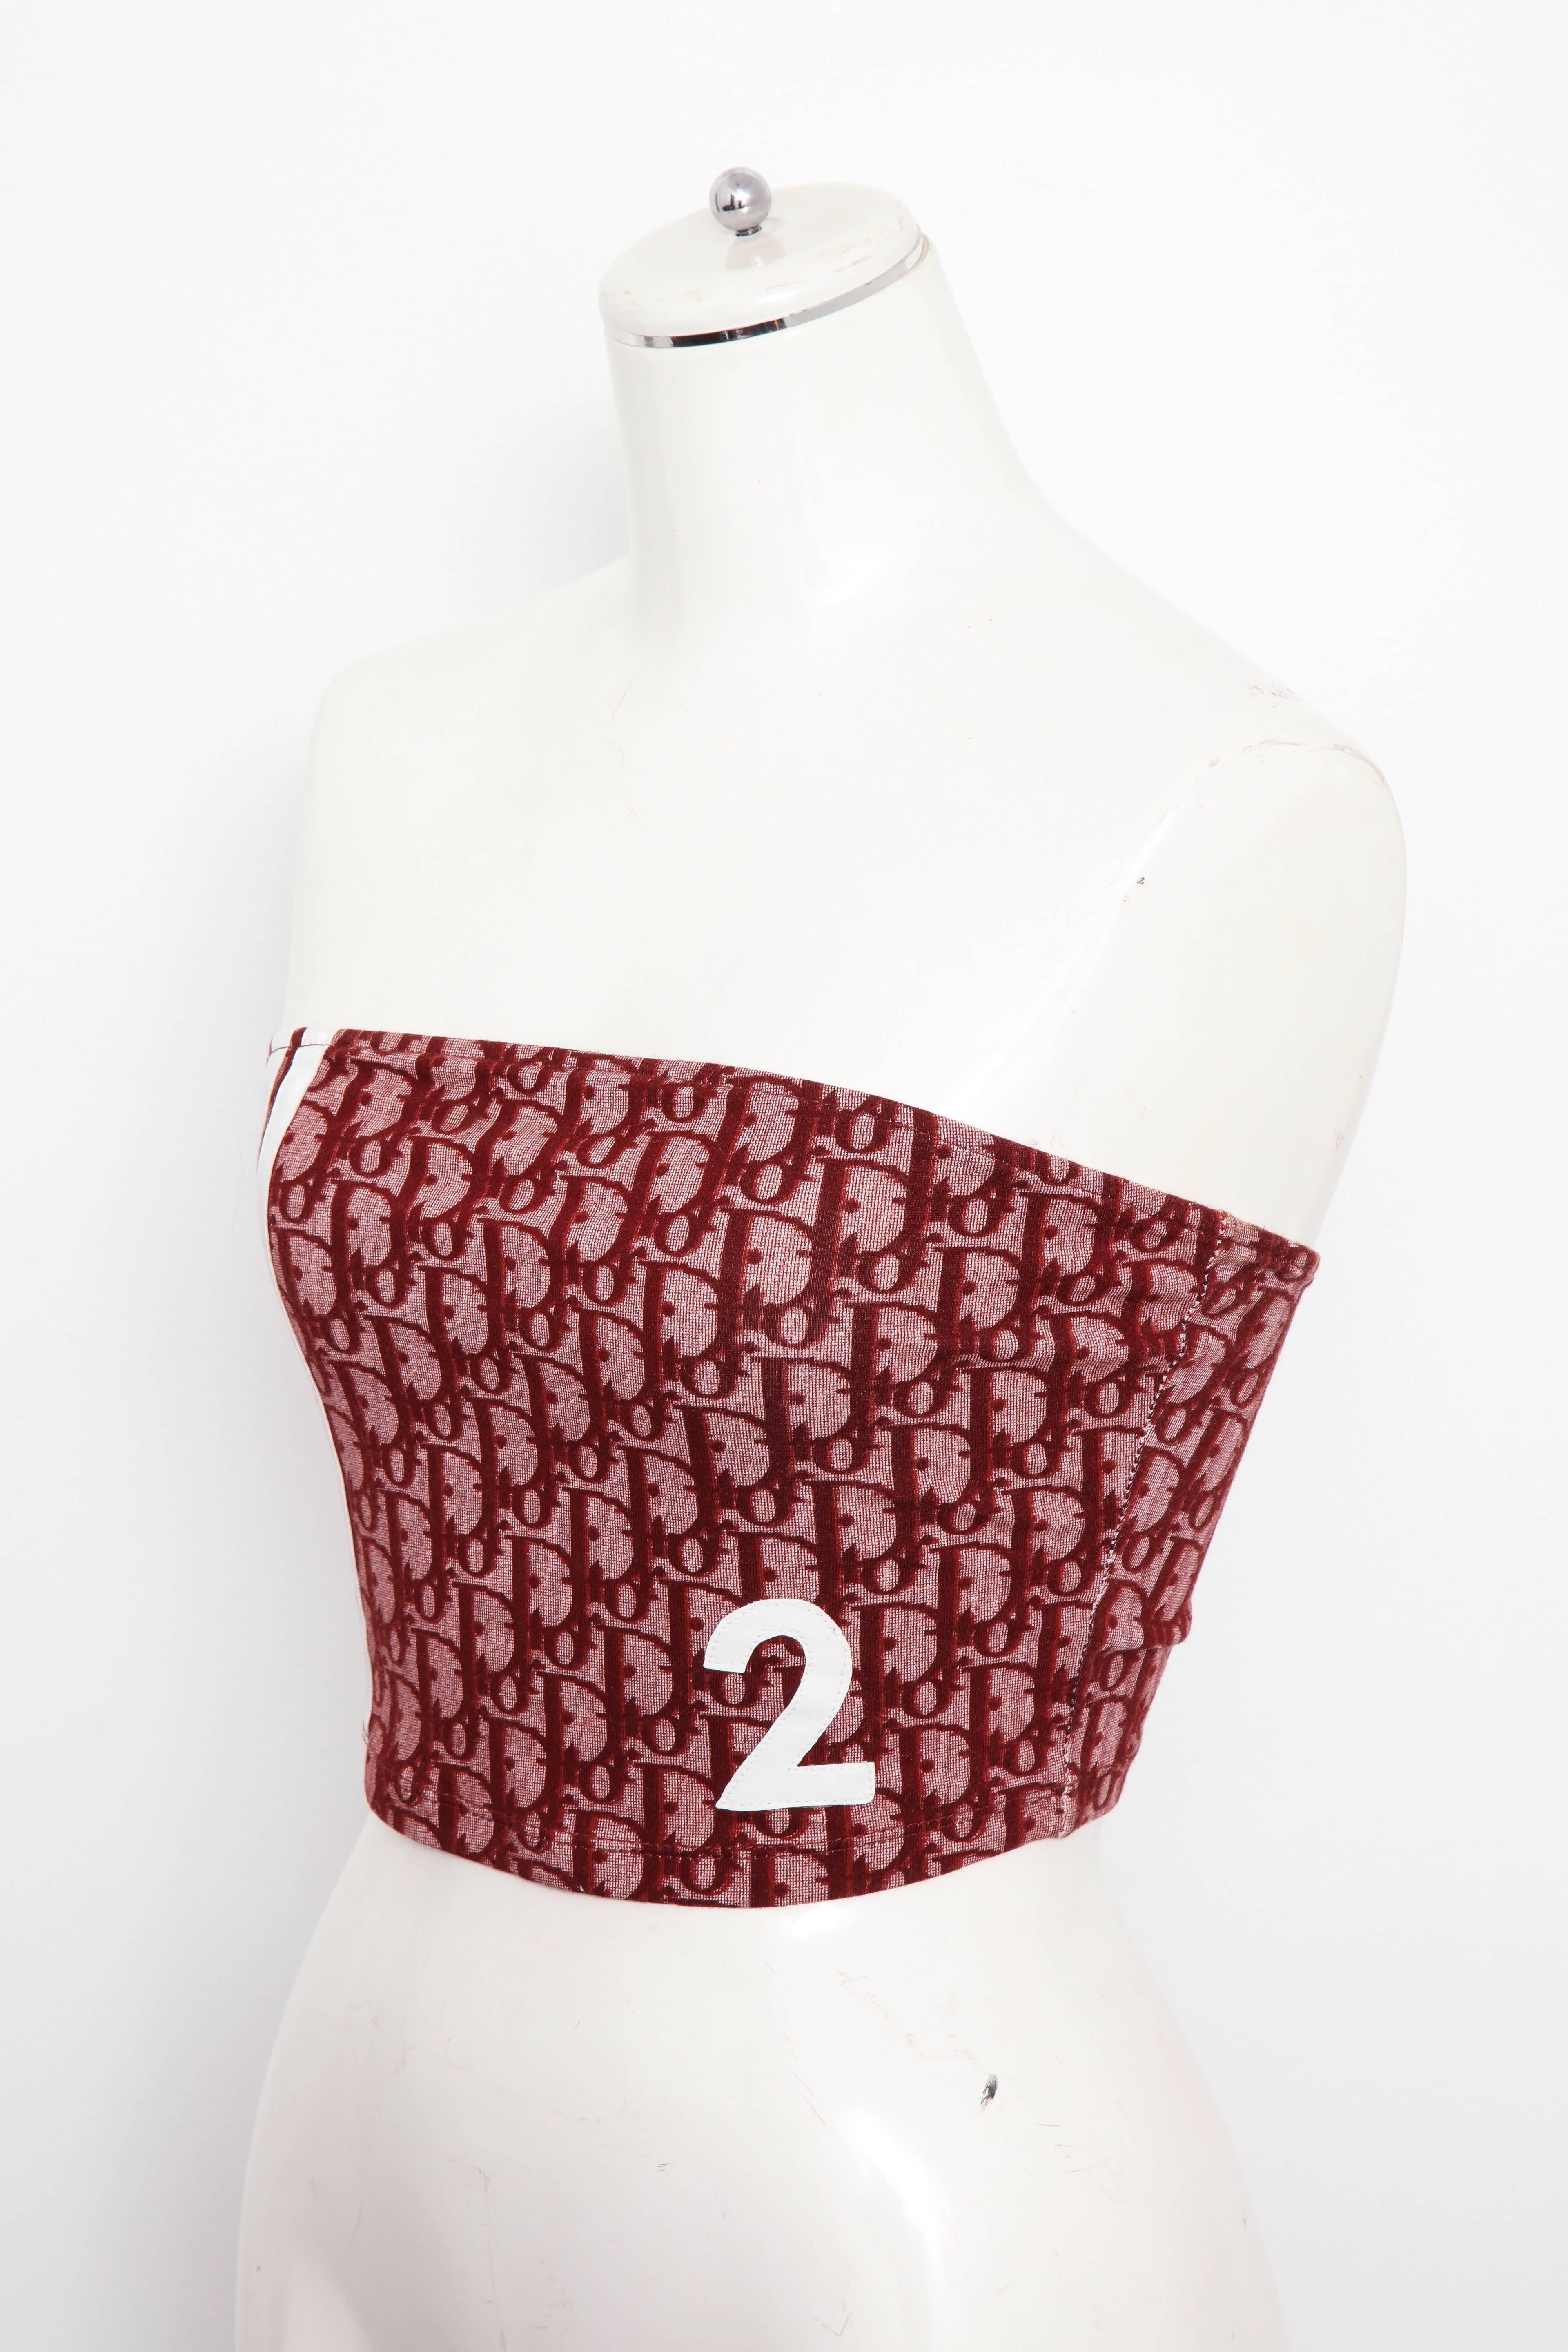 Extremely rare Christian Dior by John Galliano tube top with the iconic logos, No.2 and stripes. French size 40